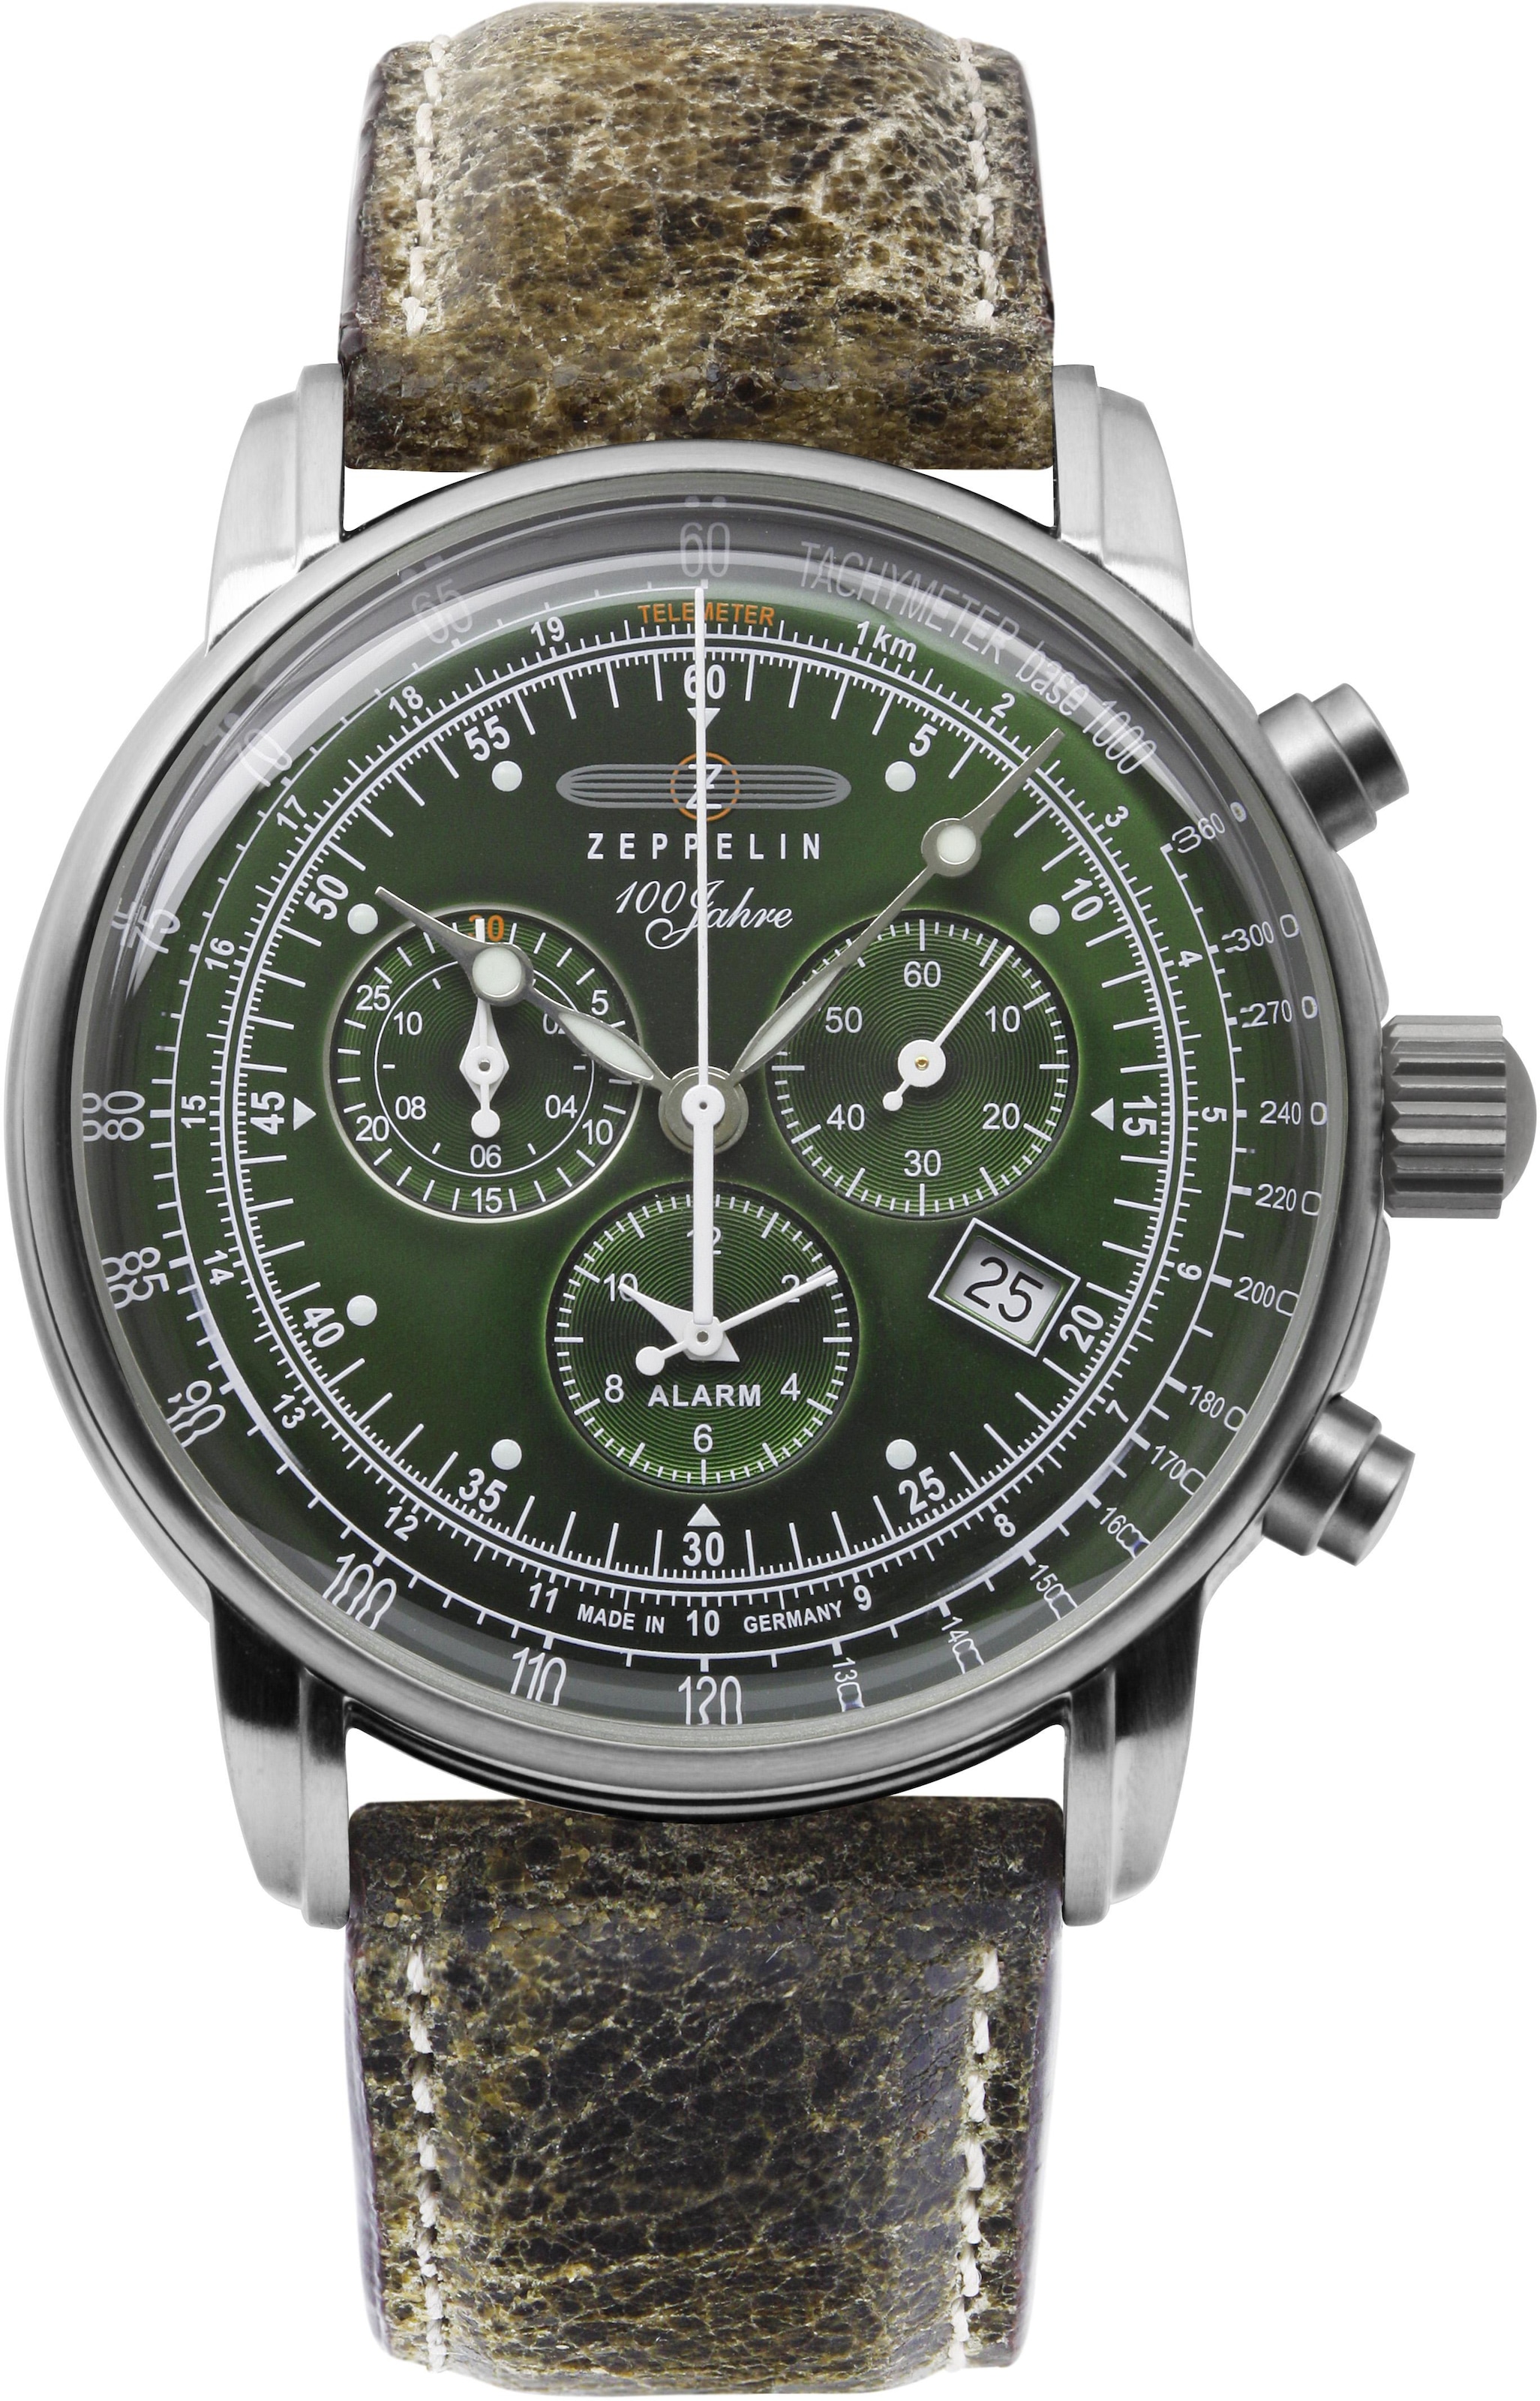 Zeppelin Chronograph in Jahre Germany ZEPPELIN Made 100 8680-4